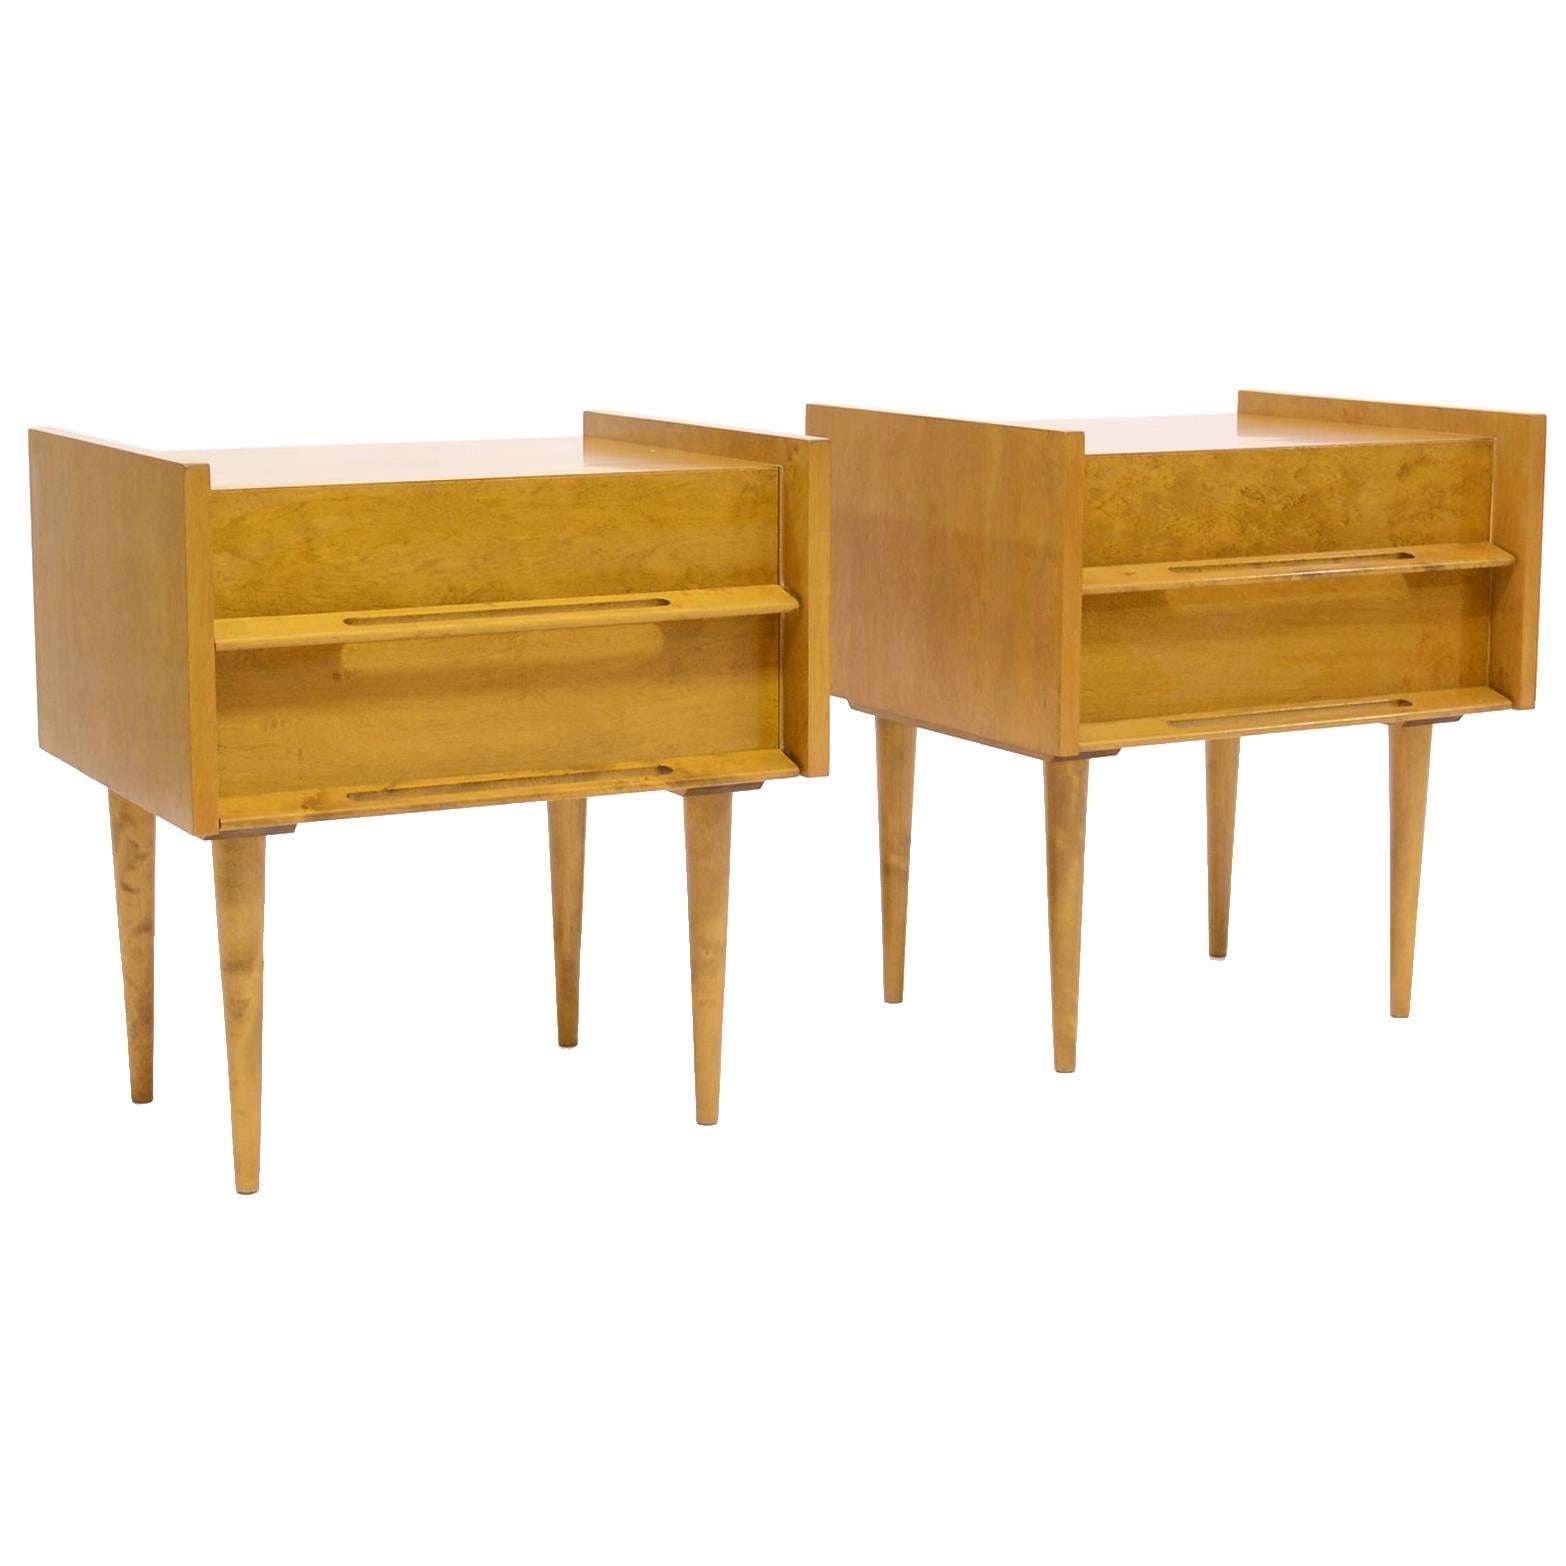 Pair of Nightstands/End Tables by Edmond Spence